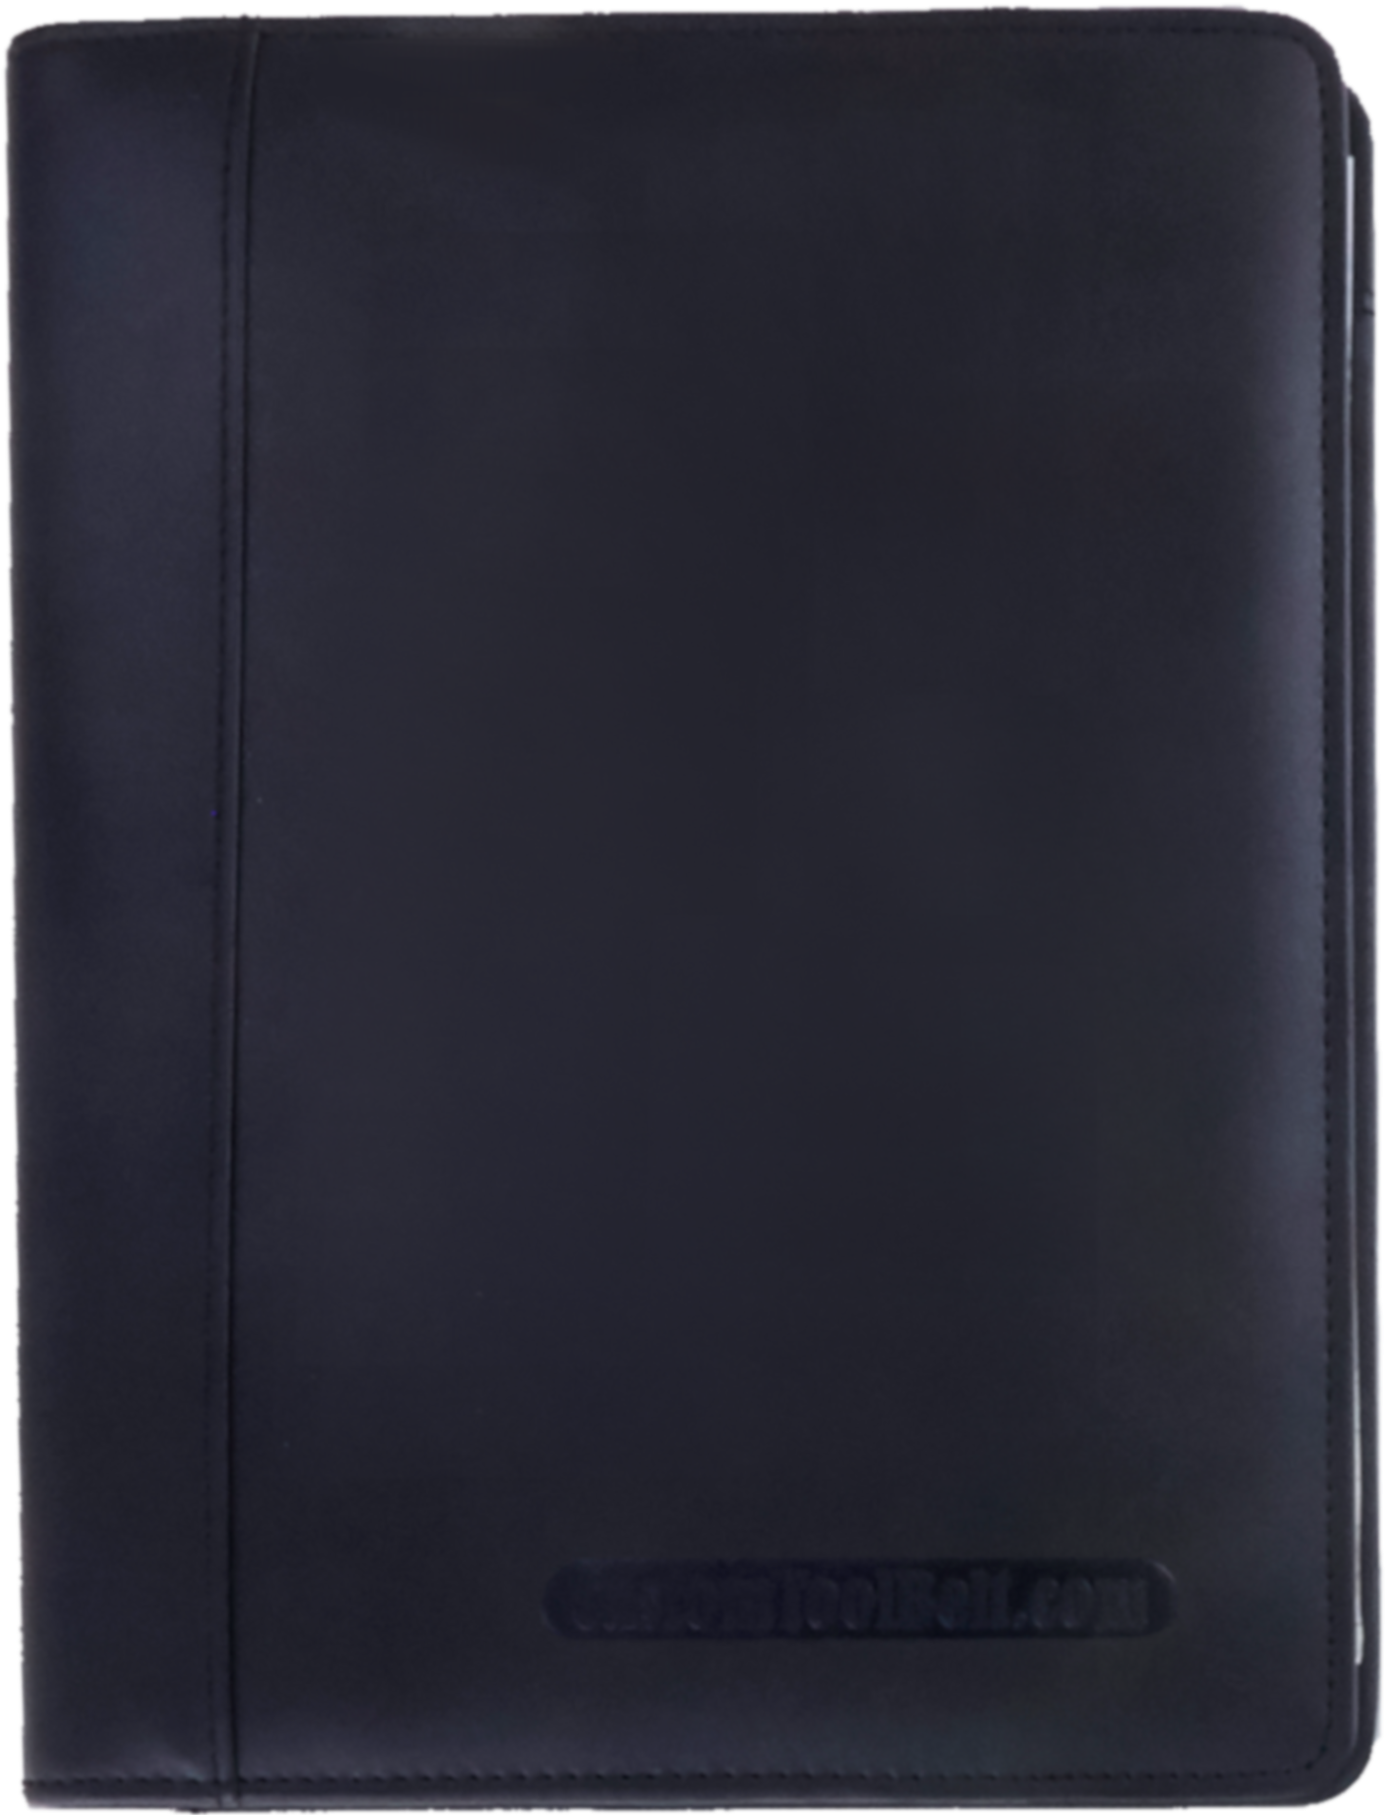 Black Leather Notebook Cover PNG